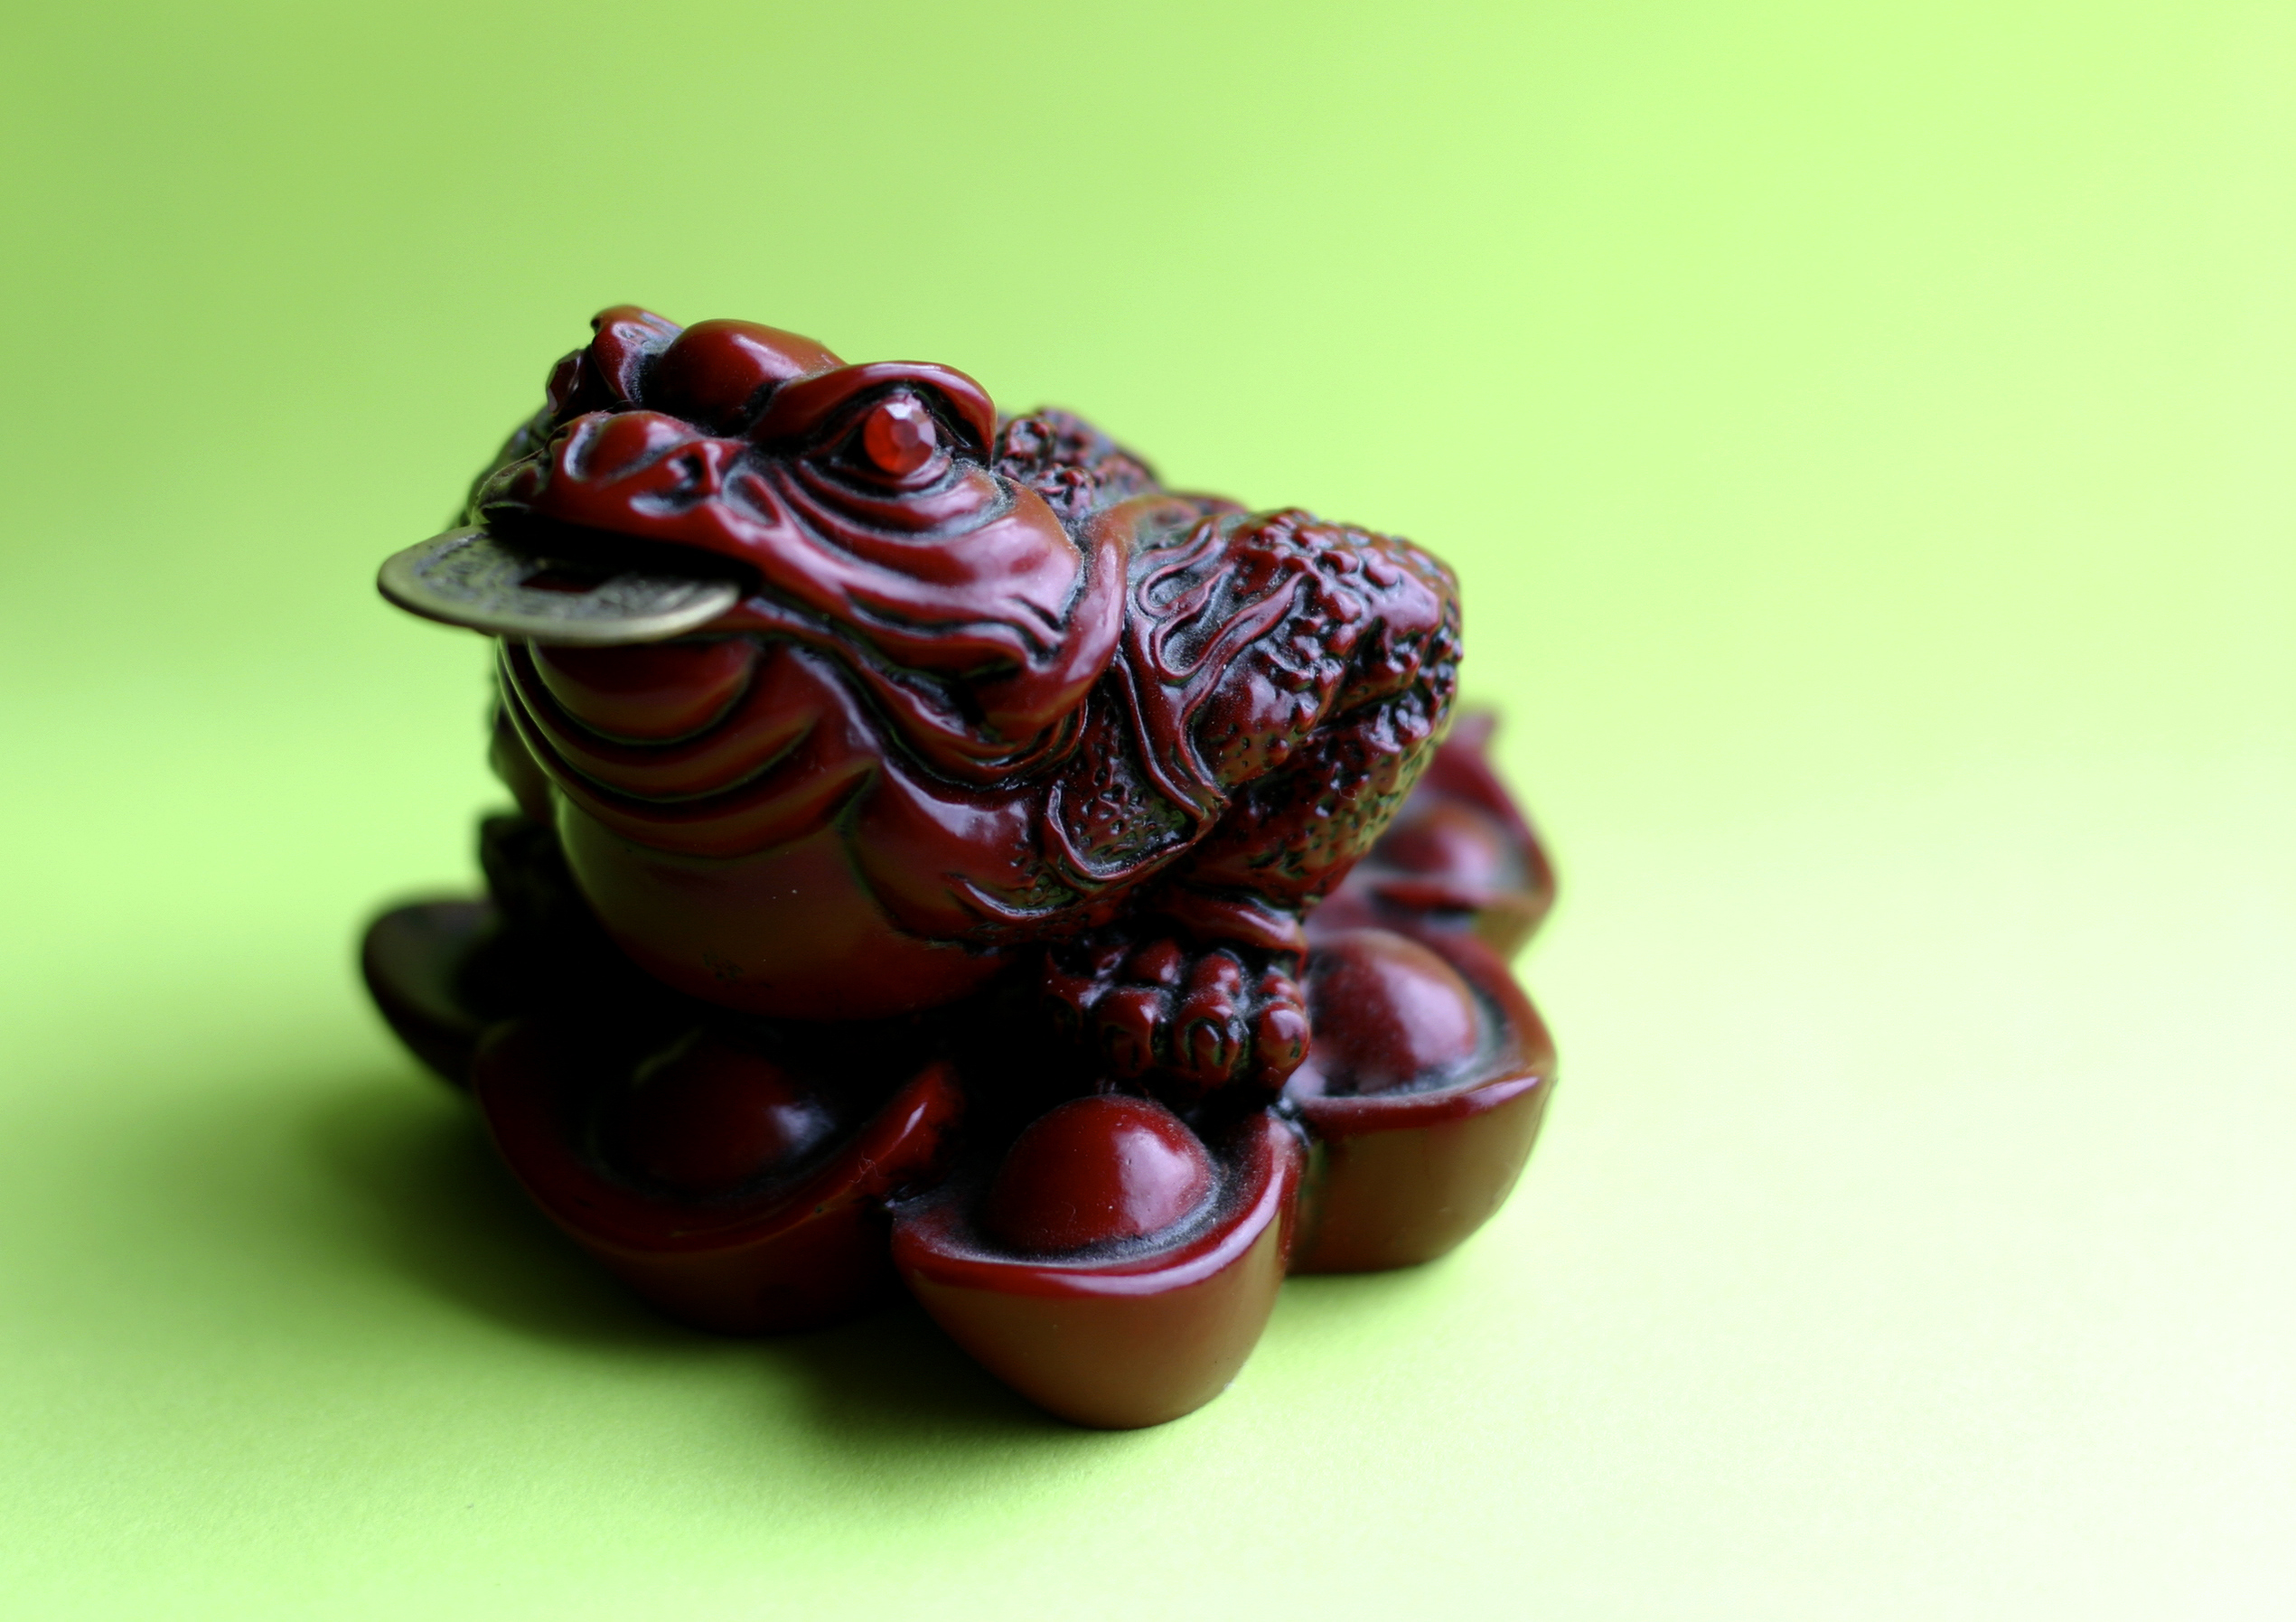 Money Frog Origami Feng Shui Tips For Displaying A Money Frog Lovetoknow